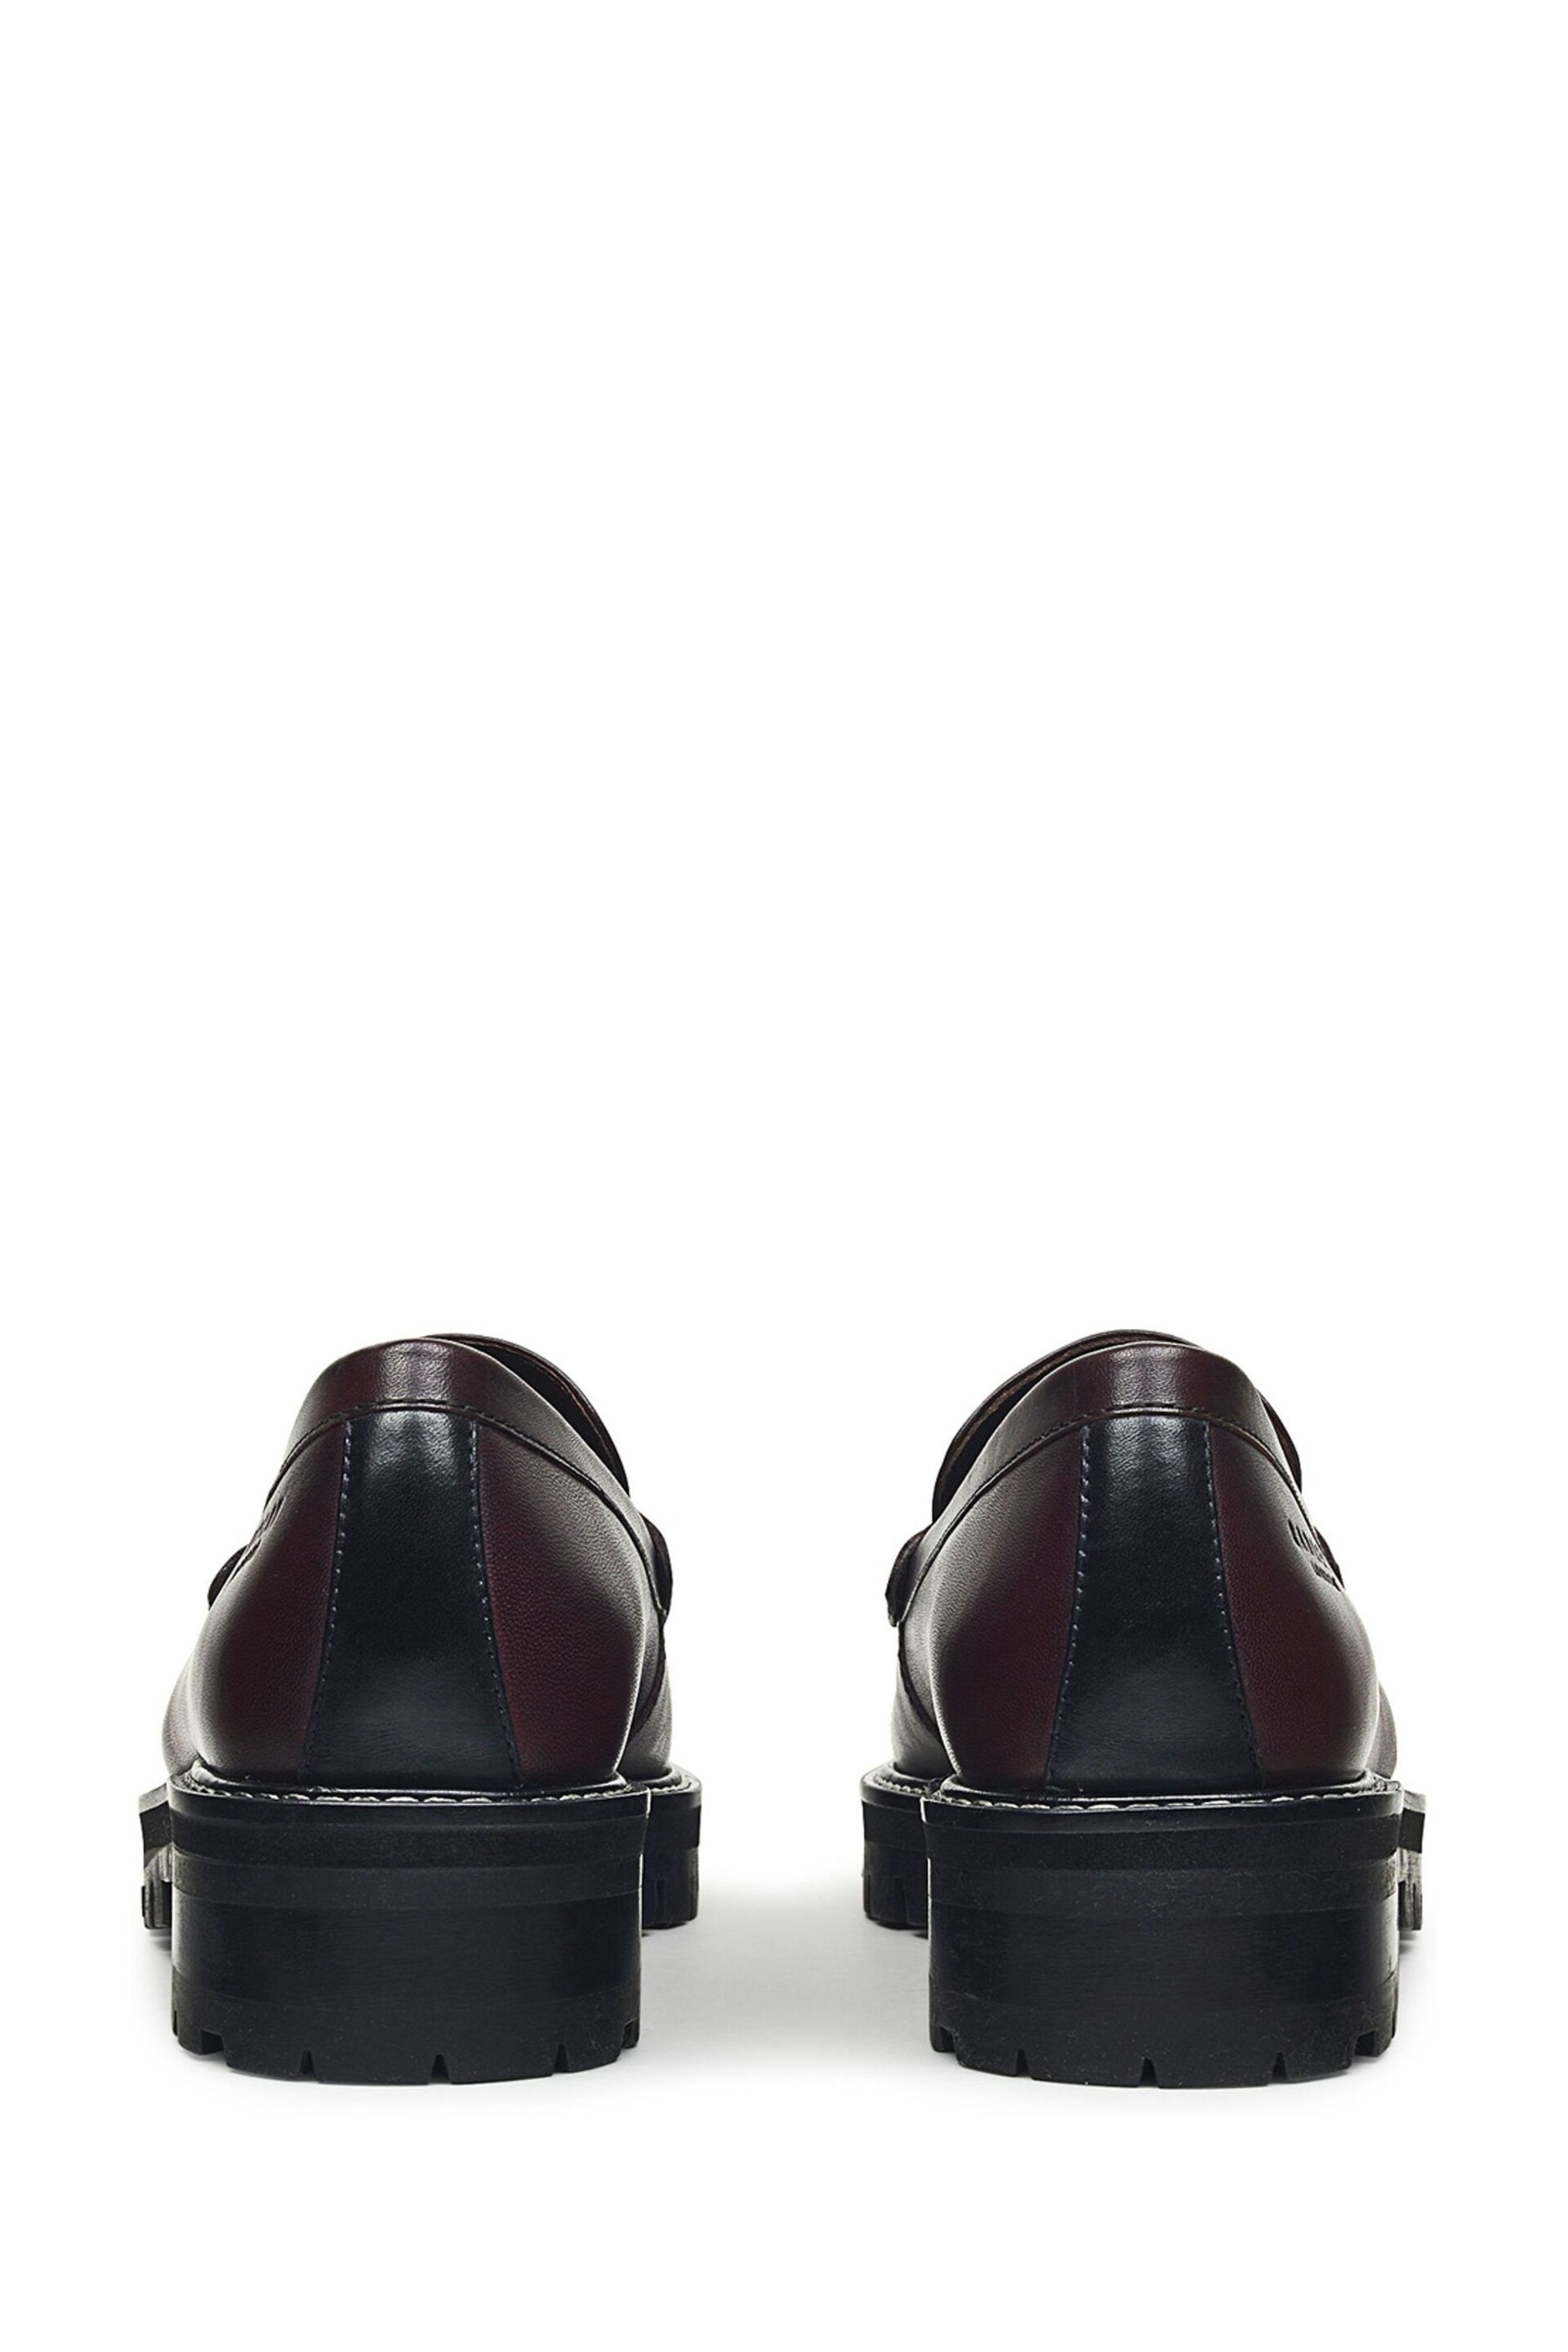 Radley London Red Thistle Grove Chunky Penny Loafers - Image 2 of 3